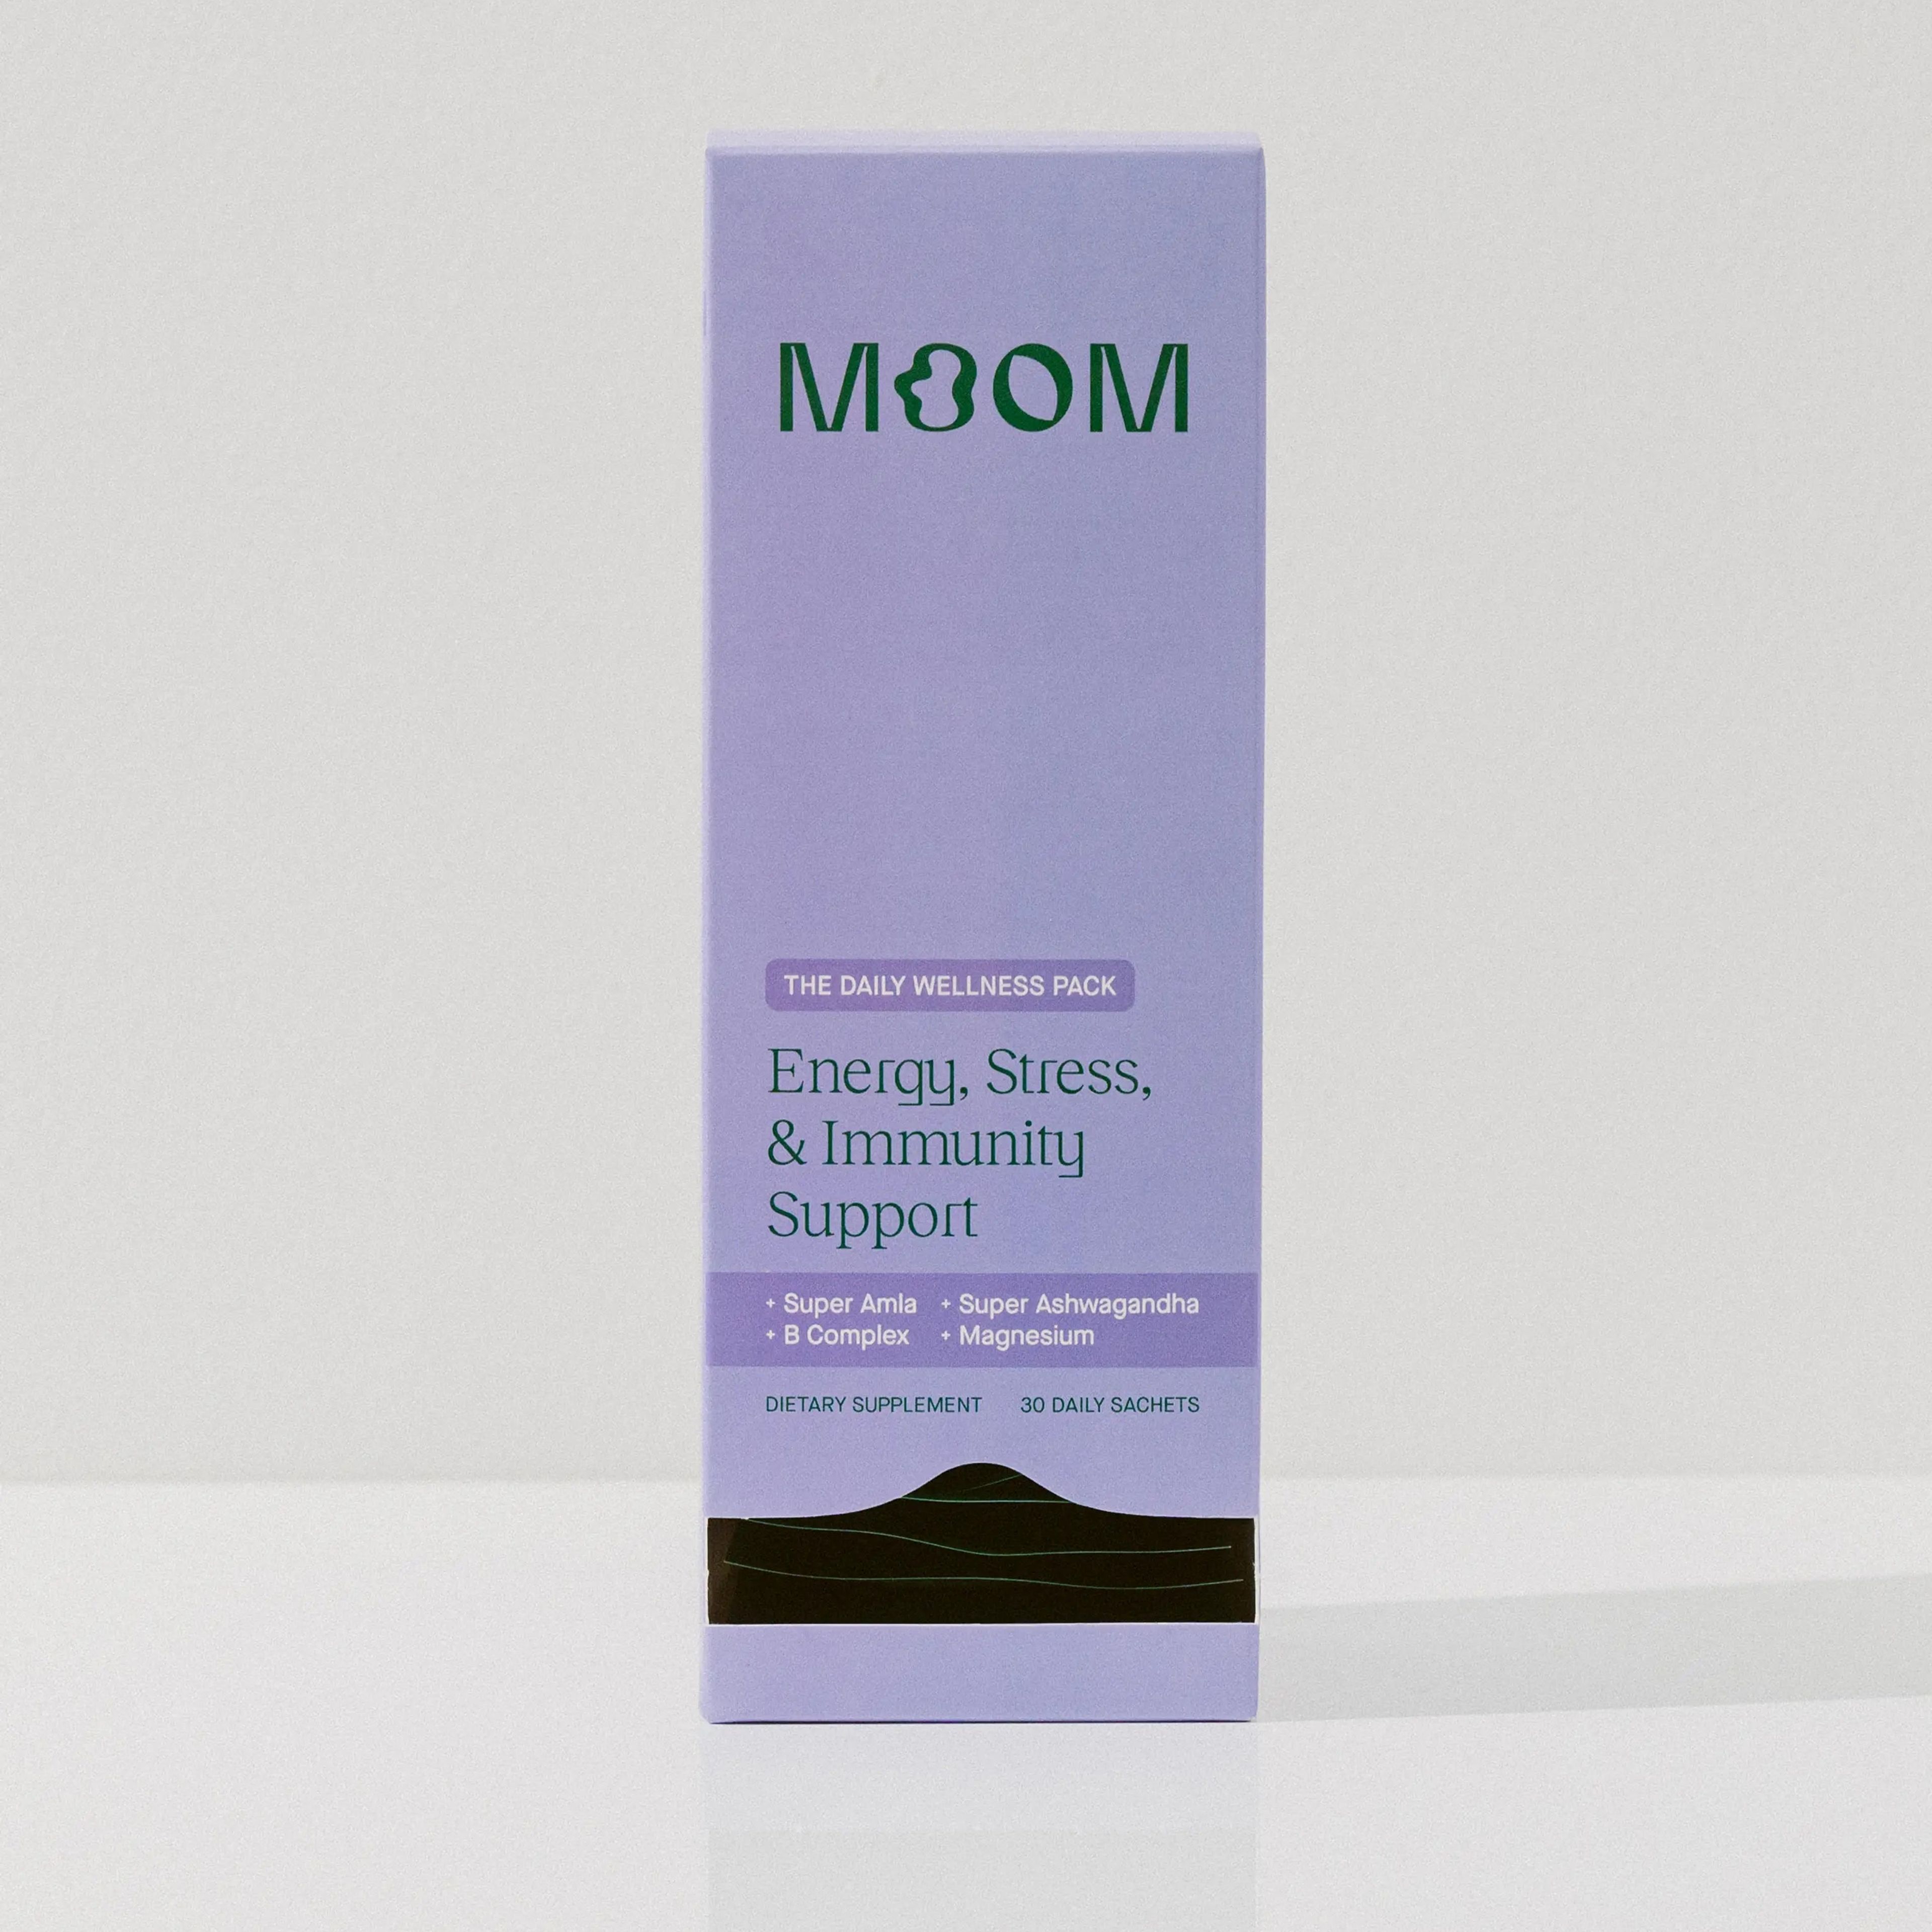 www.moom.health/products/the-daily-wellness-pack